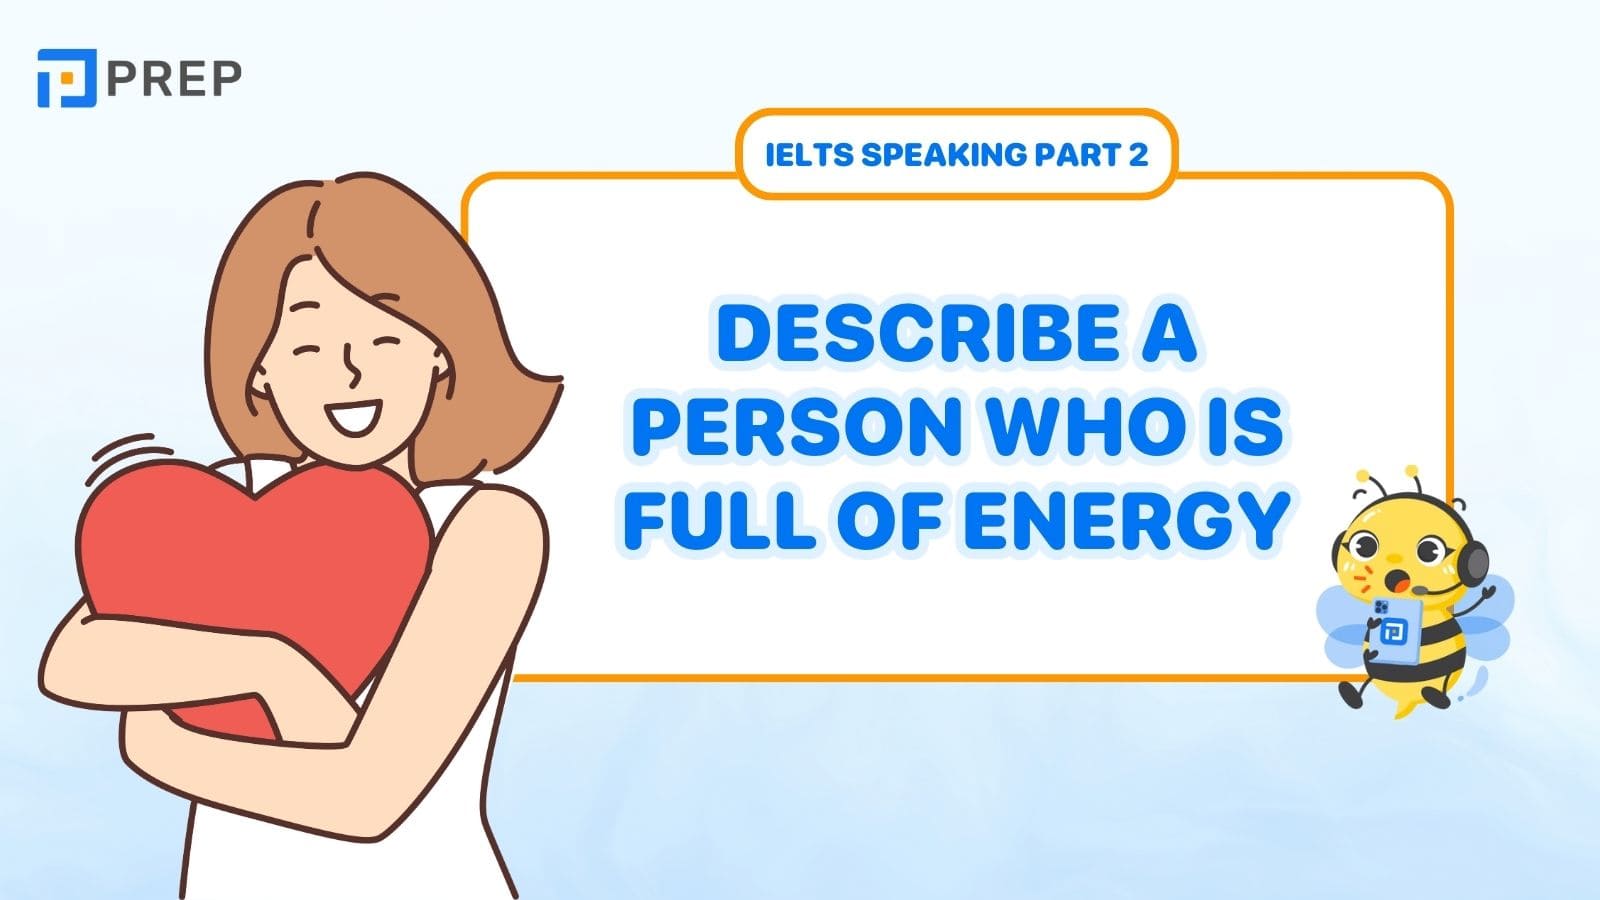 Describe a person who is full of energy